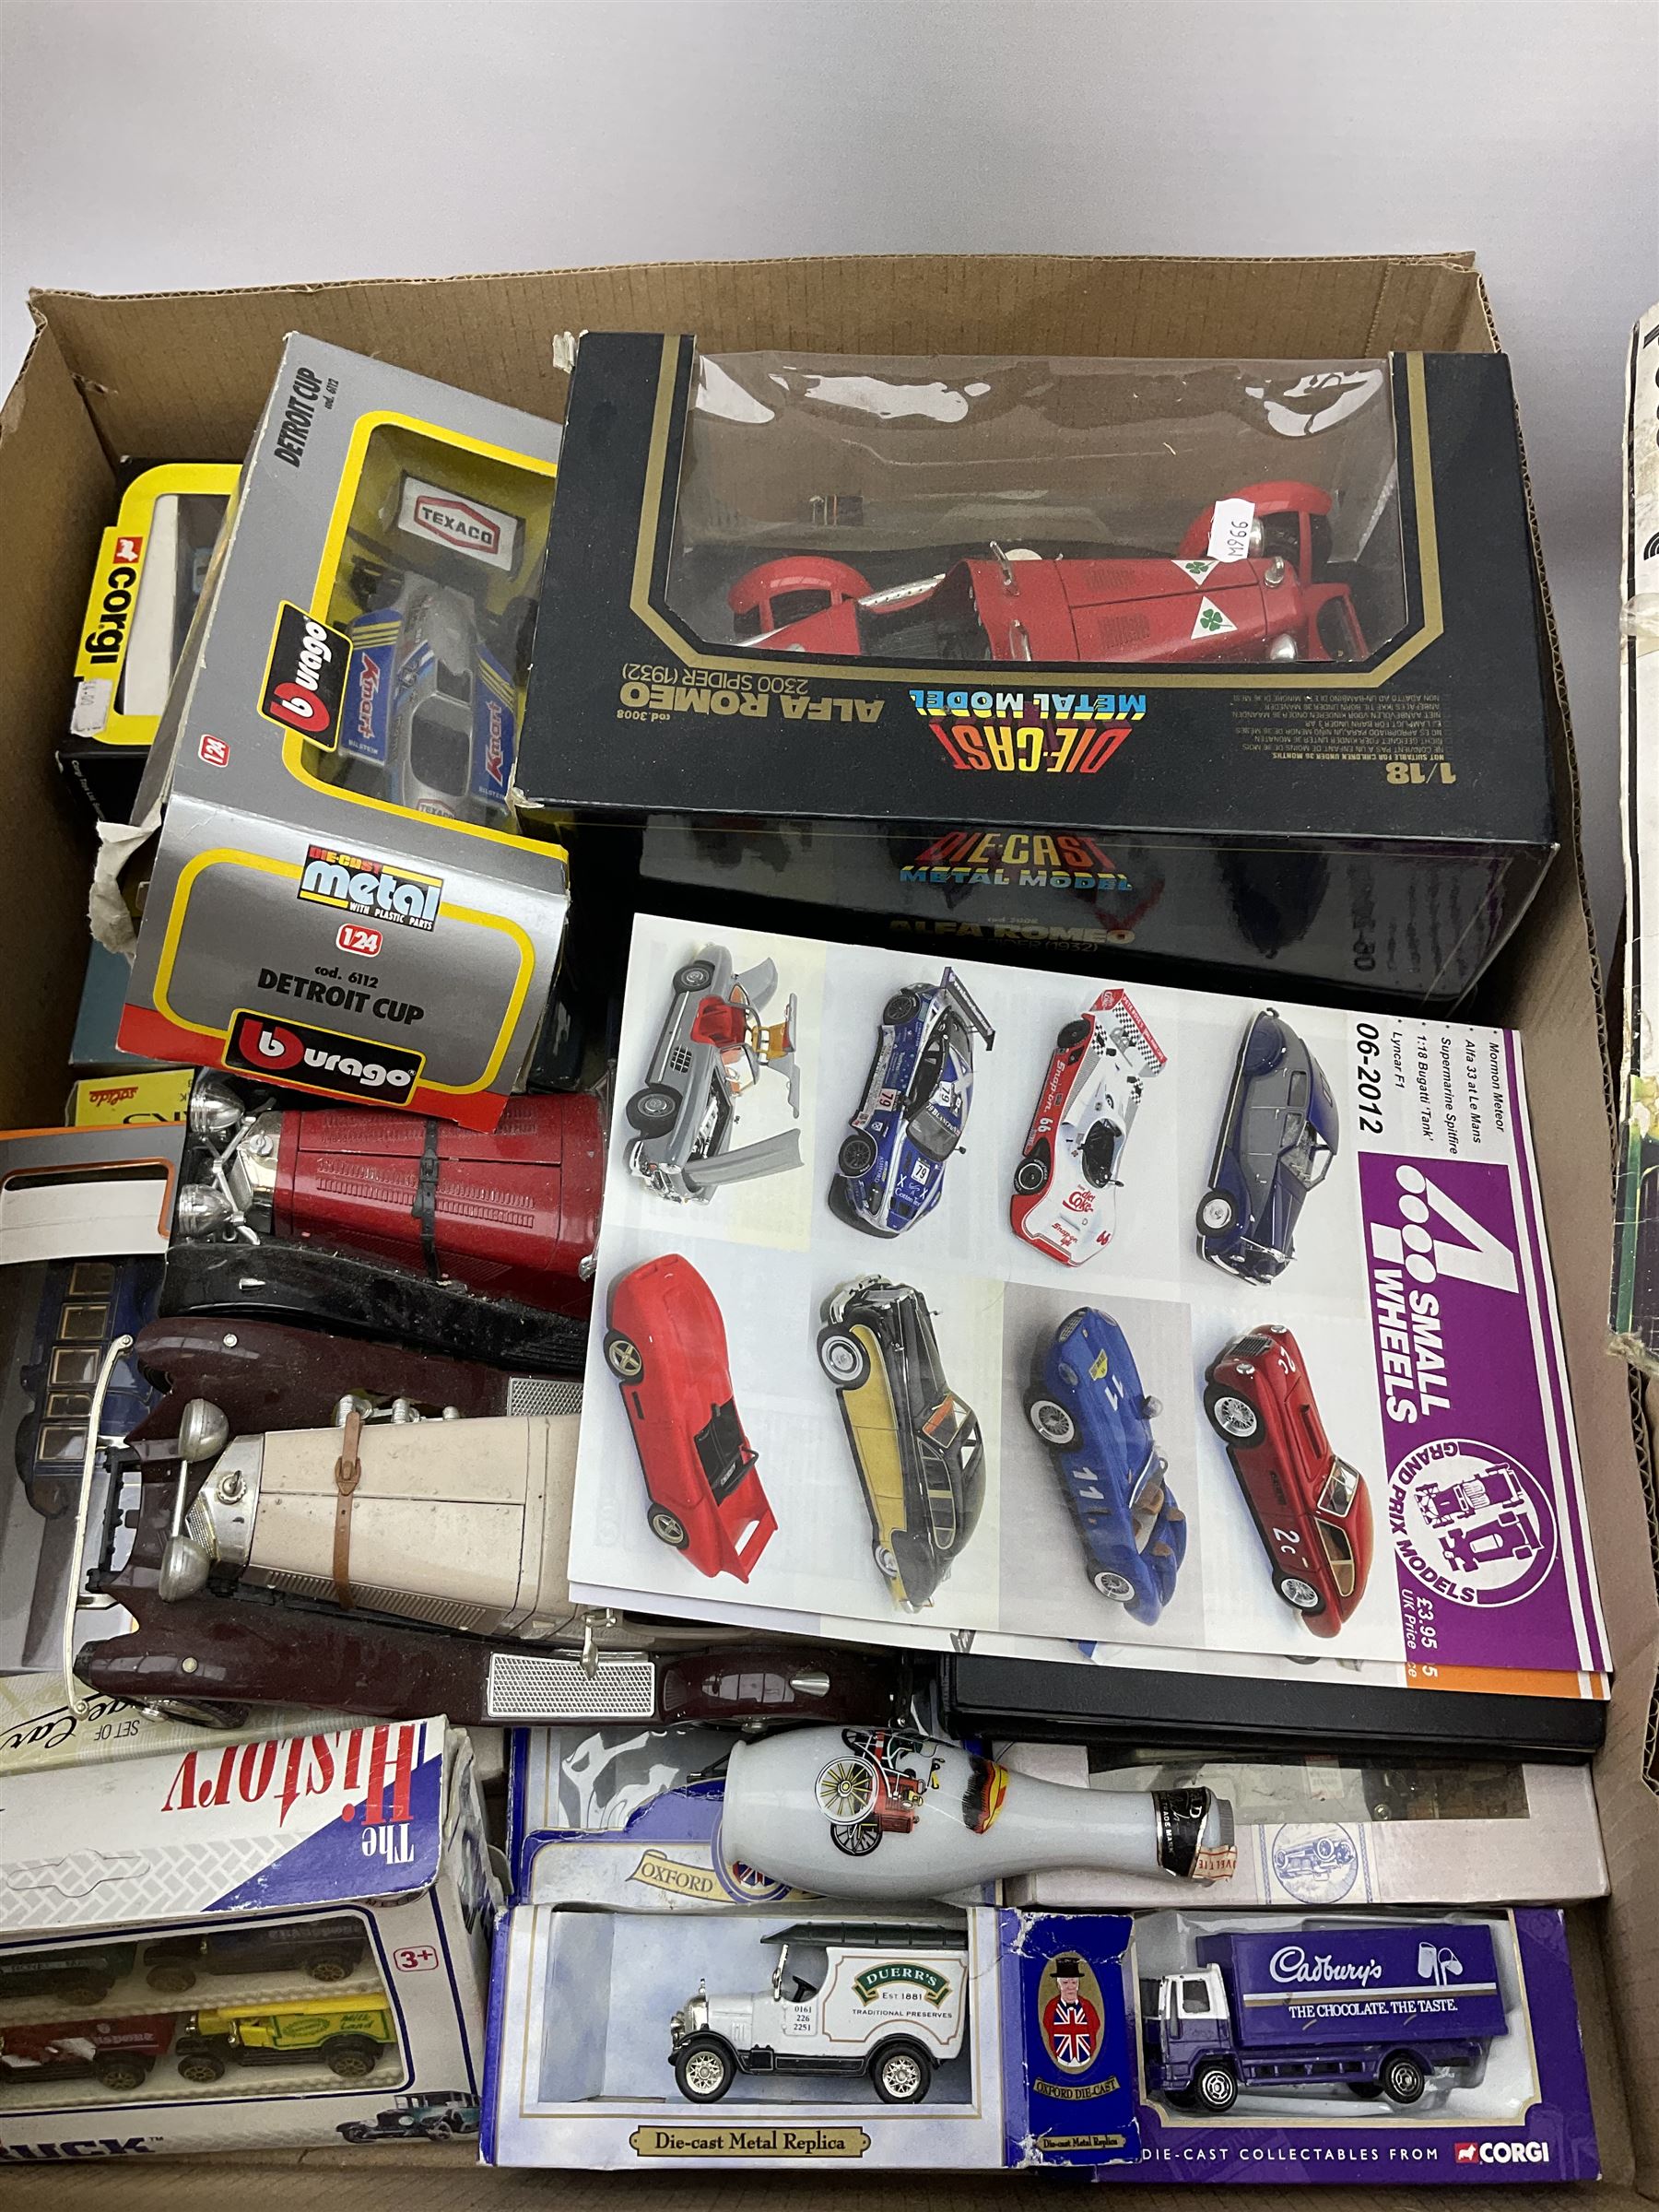 Toys including boxed and loose diecast model vehicles - Image 4 of 4